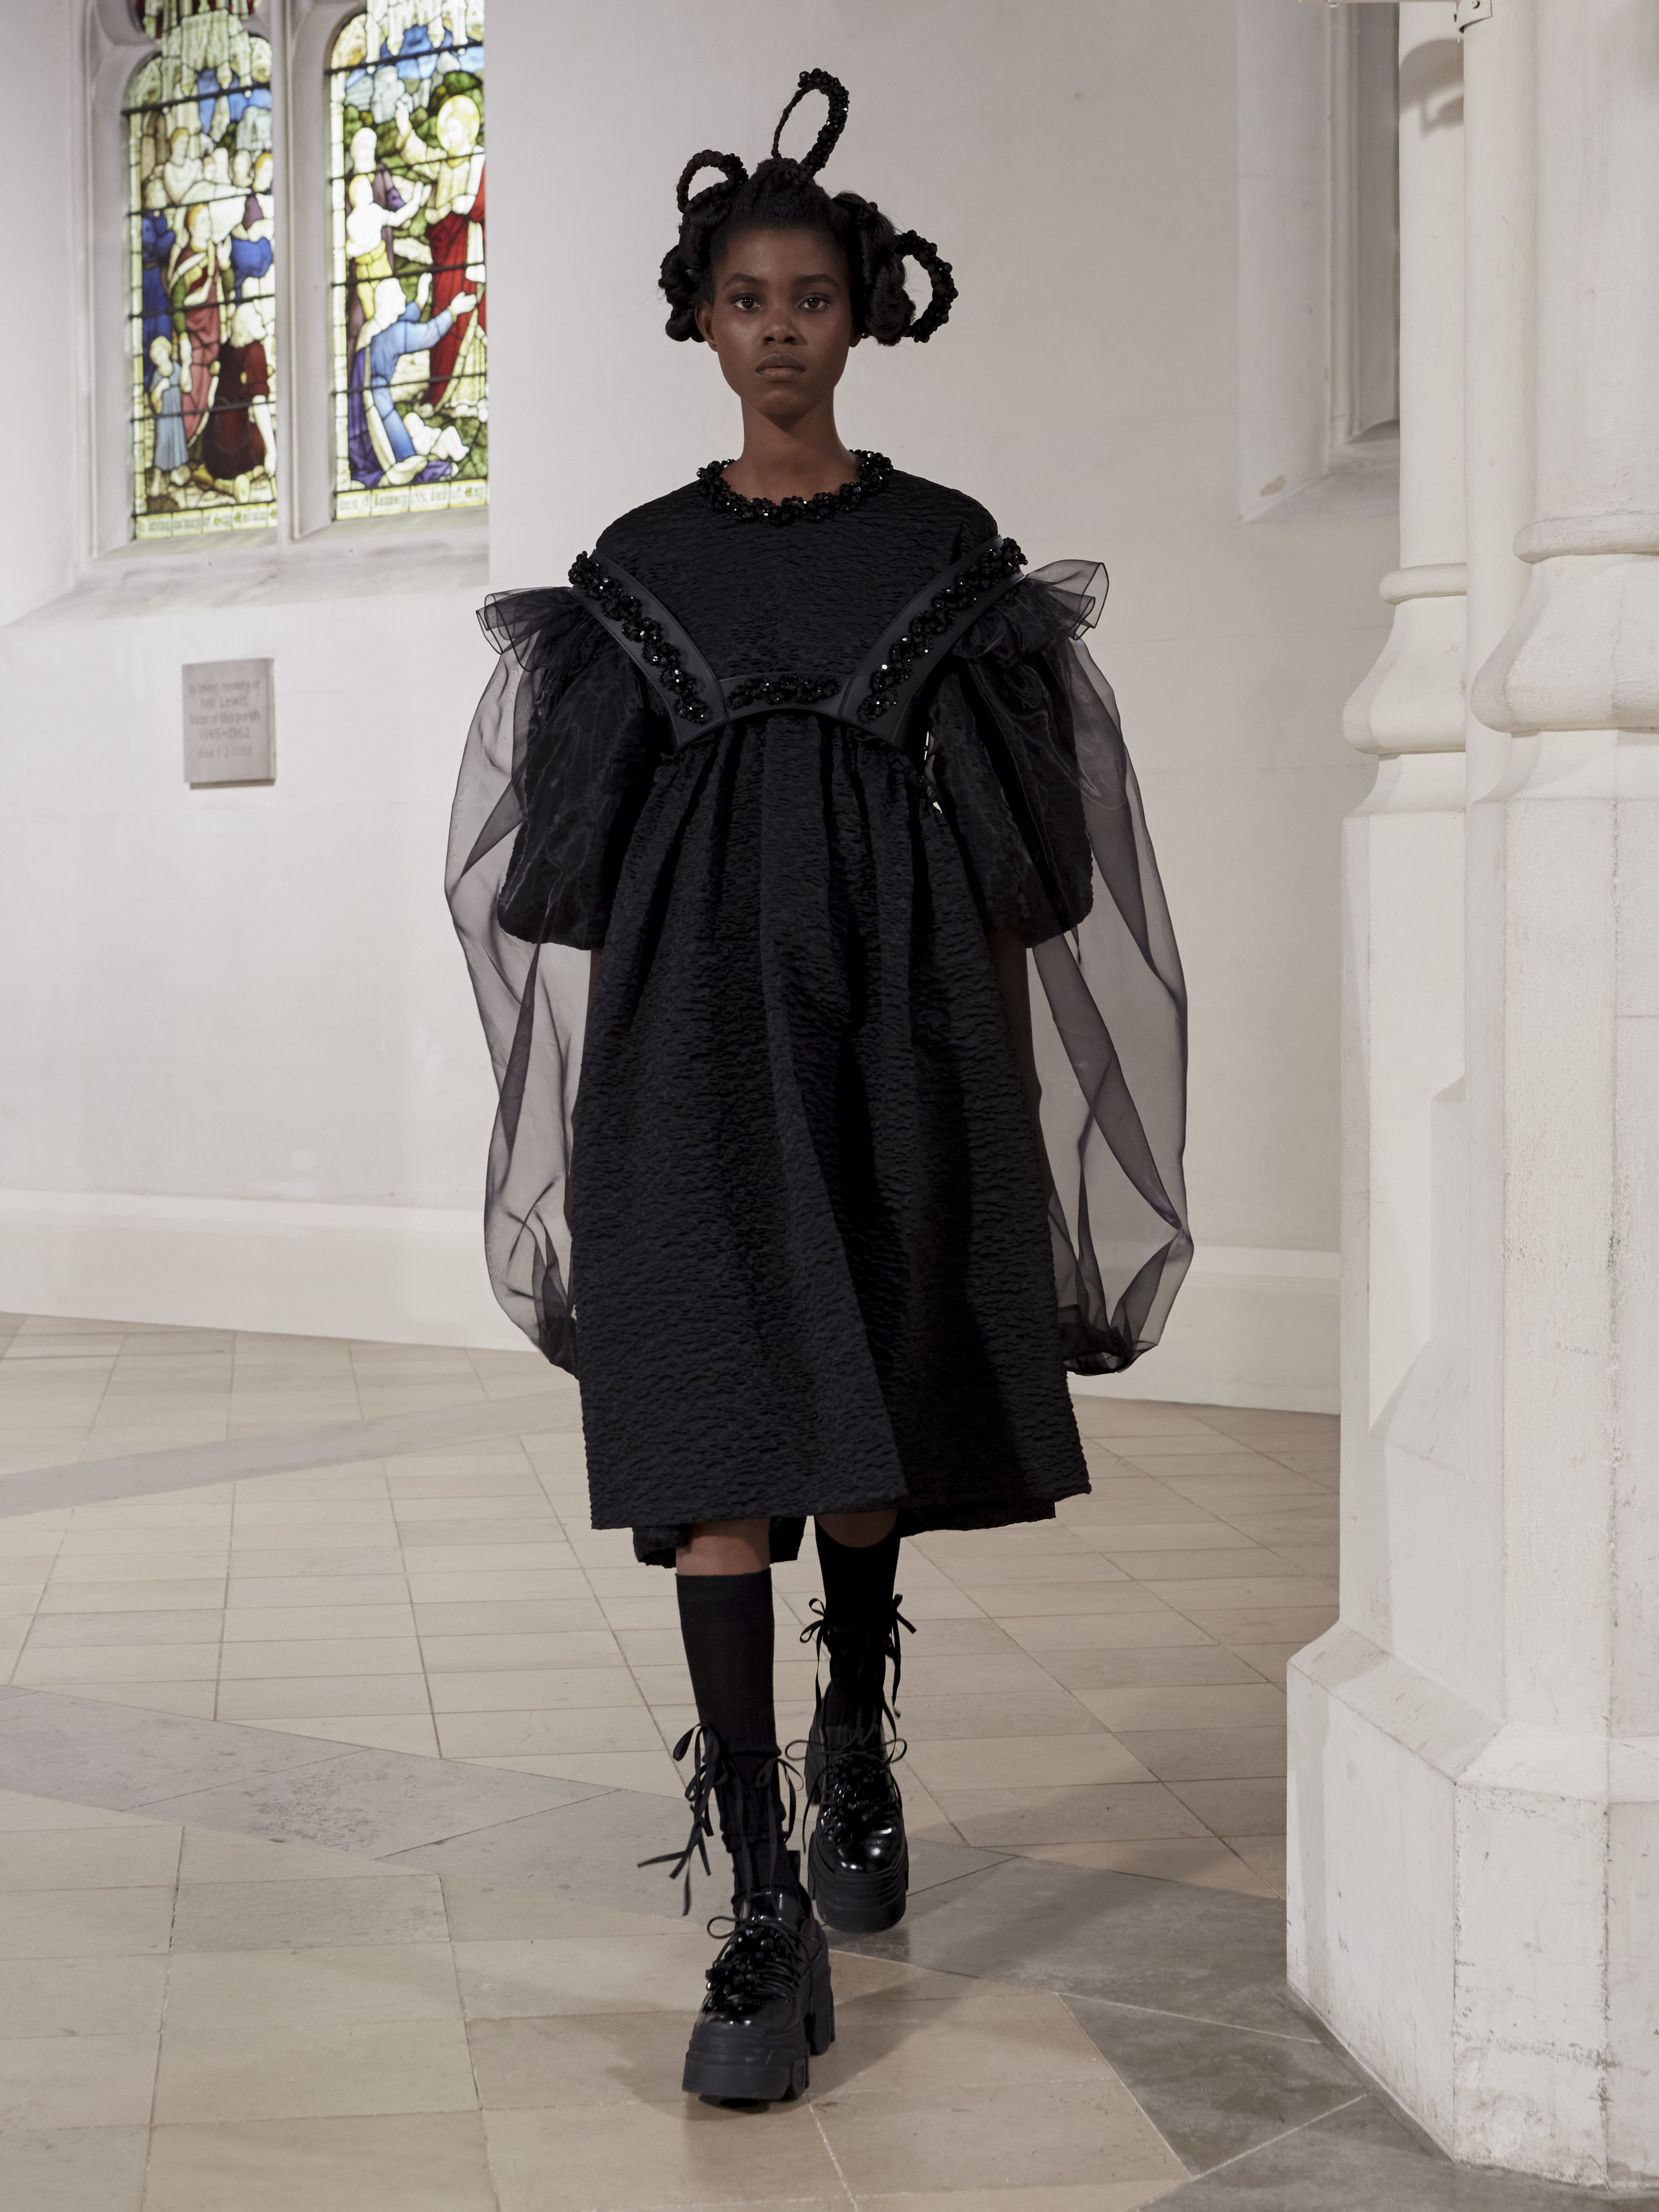 Simone Rocha presented her new collection in london